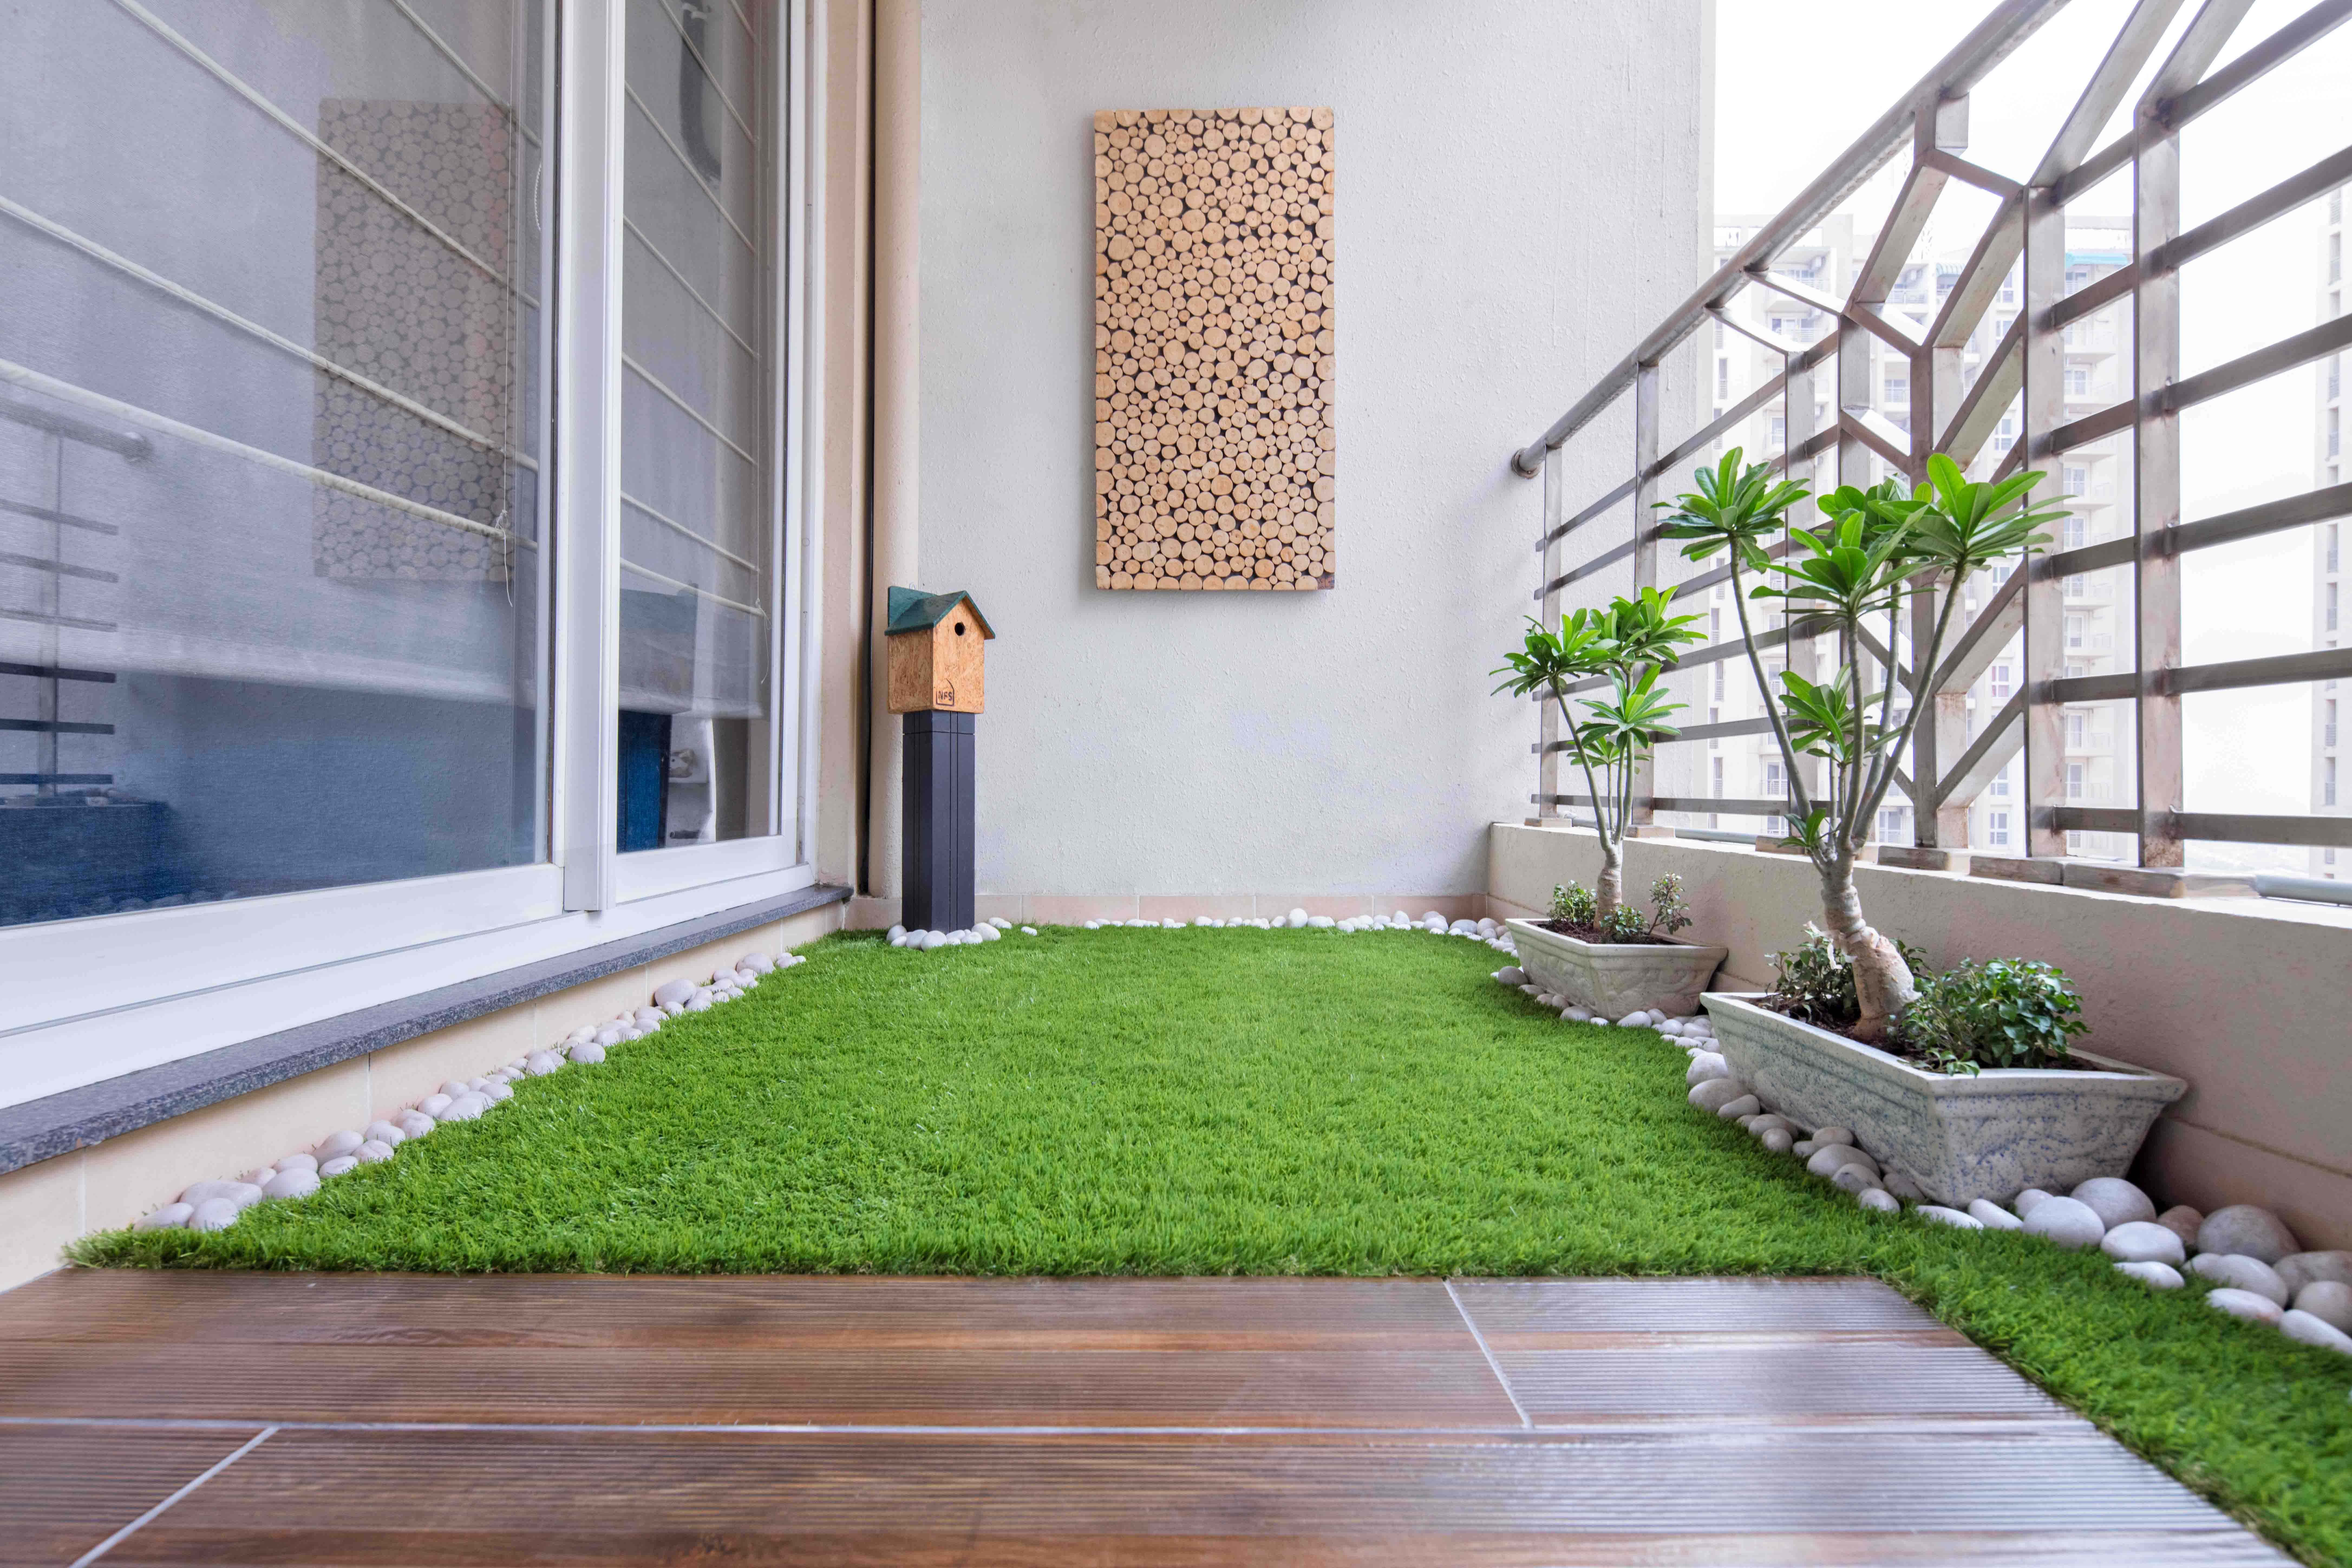 Modern Balcony Design With Turf Grass Flooring And Mural